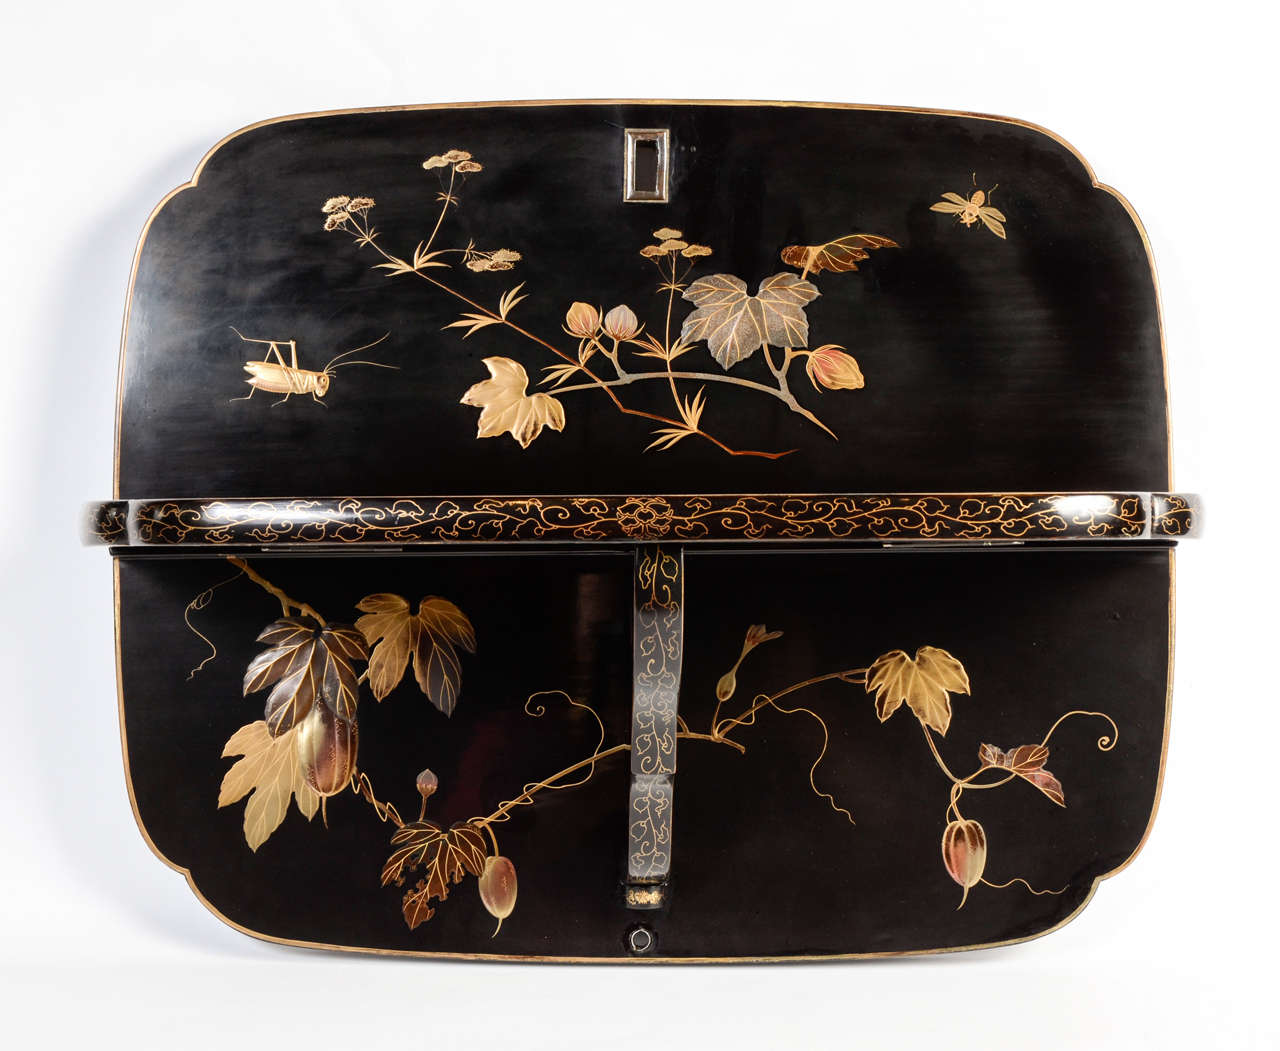 Beautiful Japanese lacquer shelf with a black background decorated with insects, leaves and polychrome lacquer watermelons.
This object is a very rare Japanese piece of furniture. It was used to host an incense burner and ikebana.

Edo period